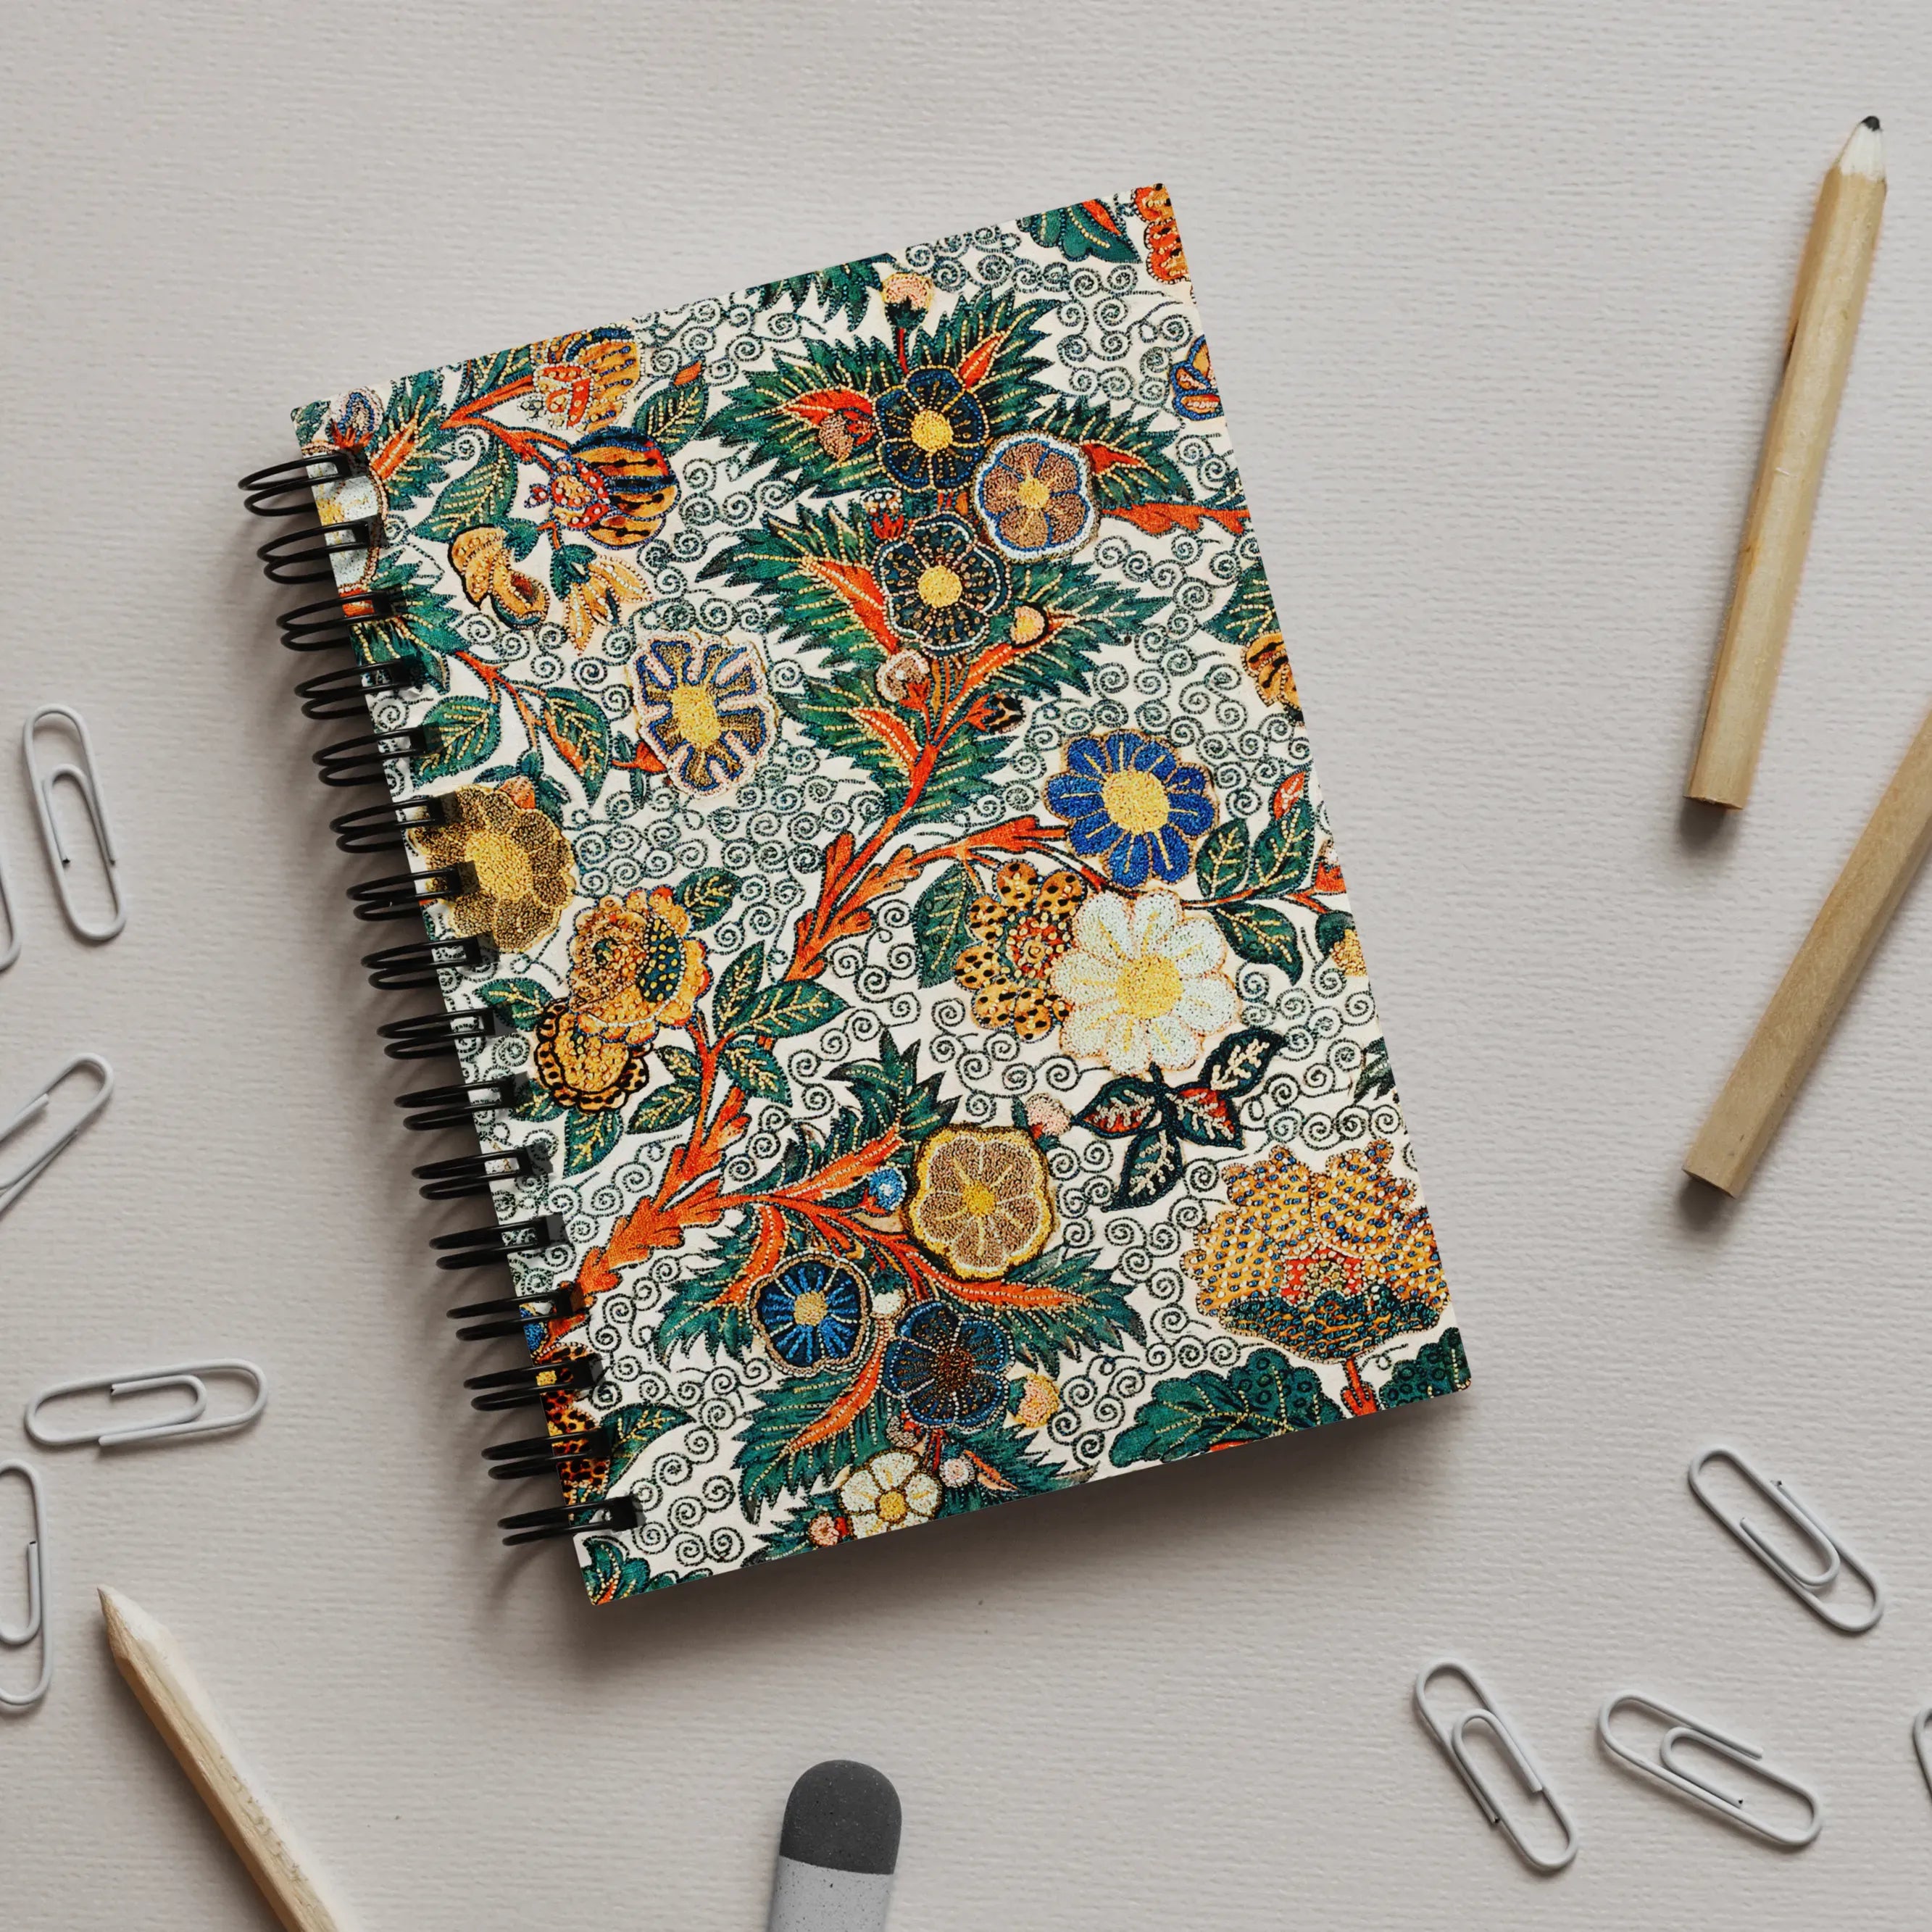 Blossomewhere - Antique Japanese Tapestry Art Notebook - Notebooks & Notepads - Aesthetic Art